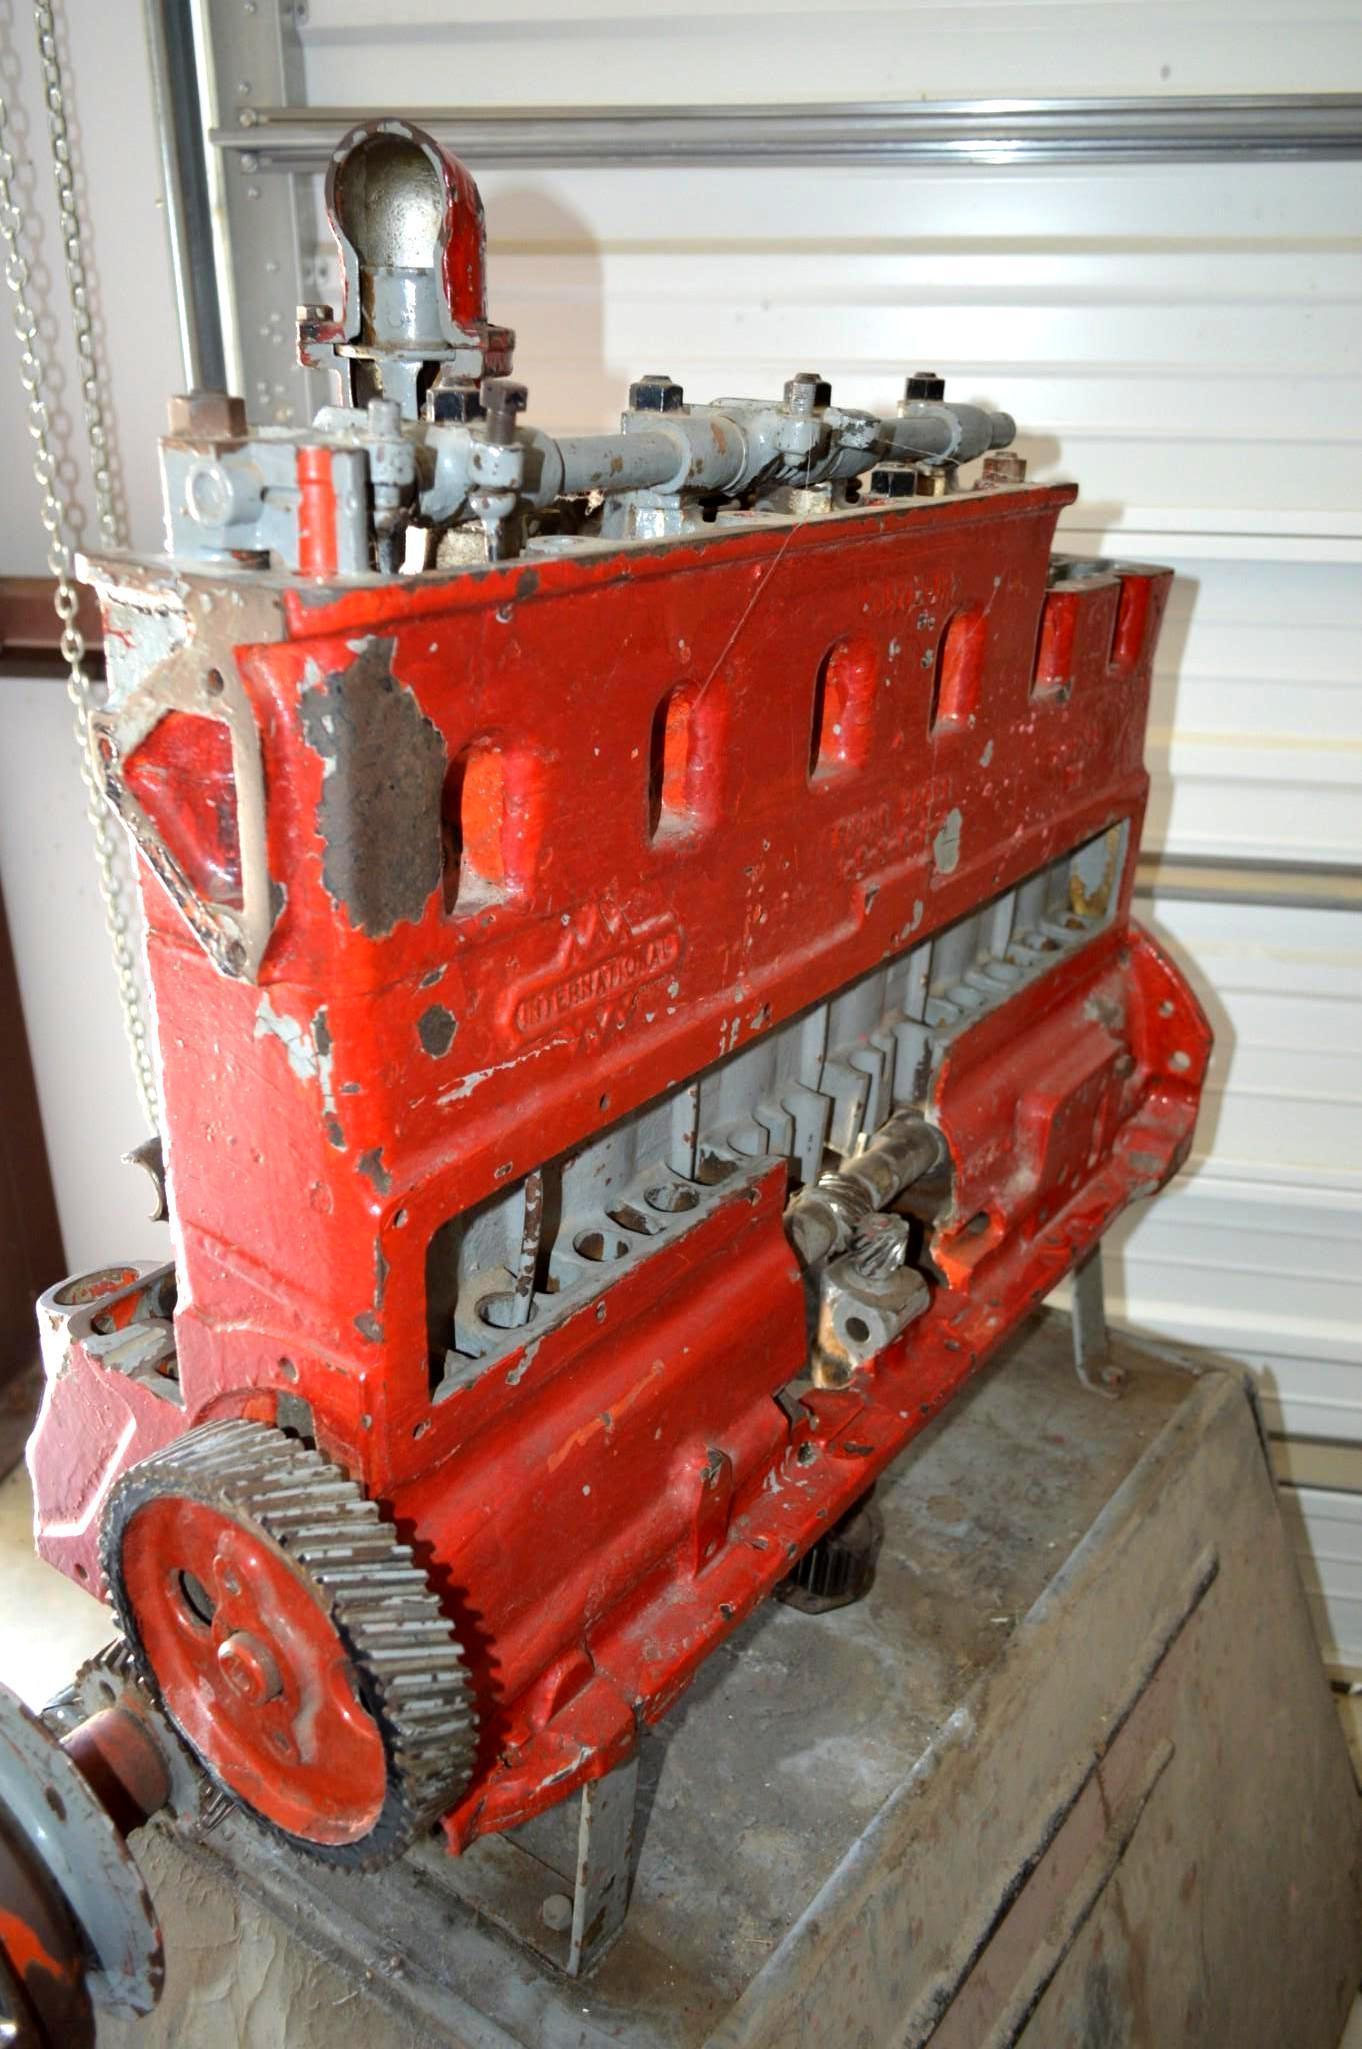 International Motor on Stand - Cut for Display/Viewing